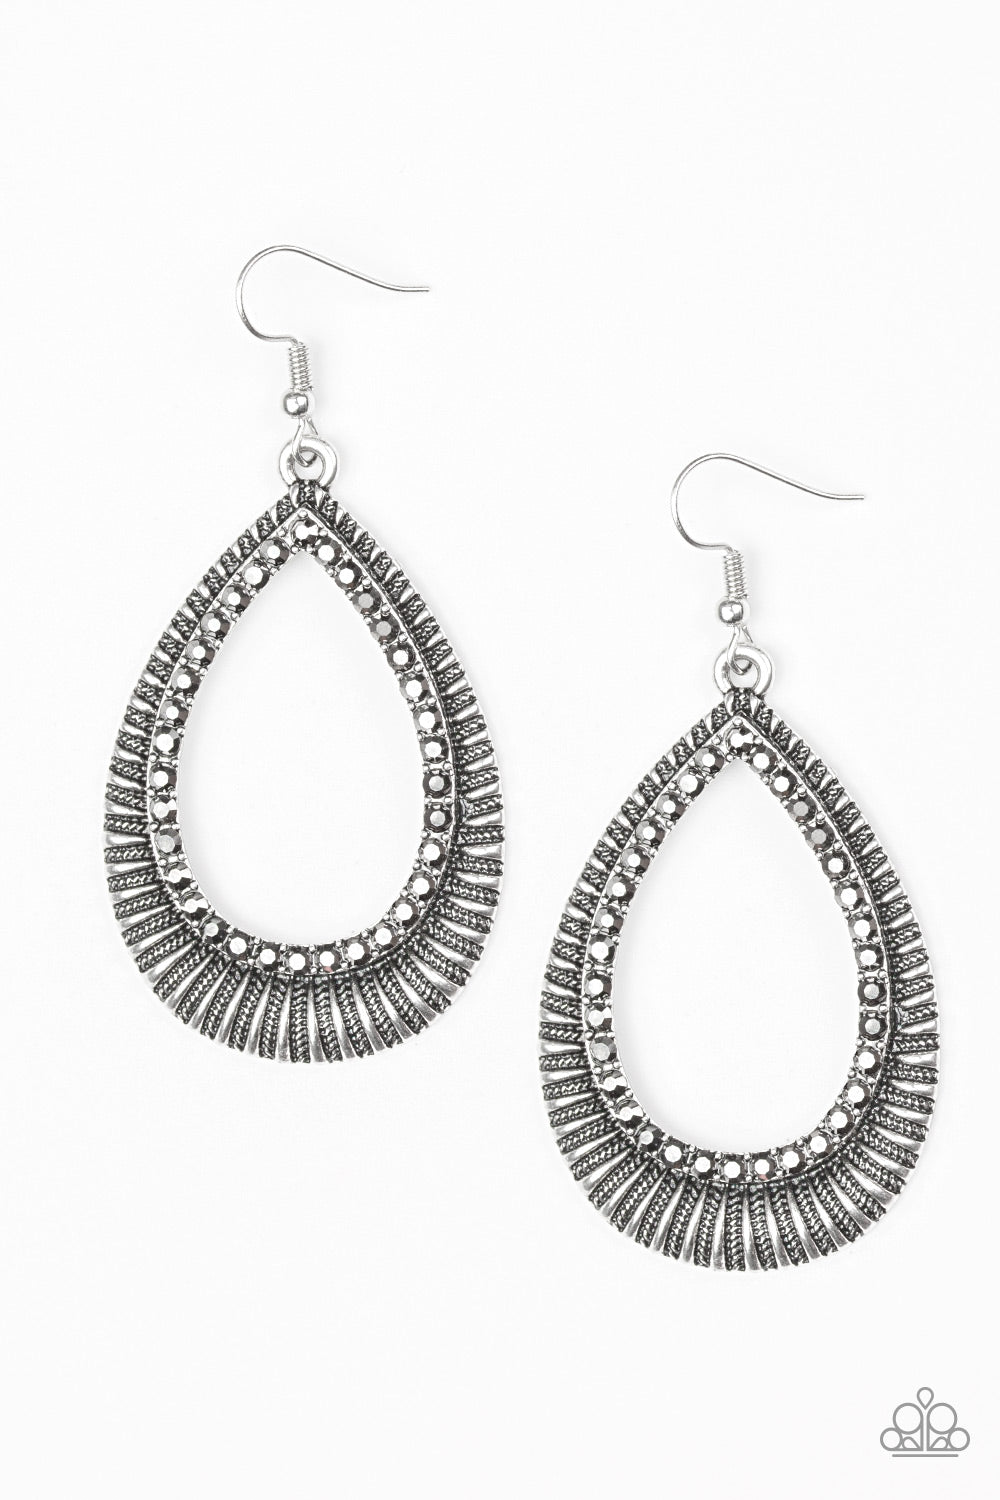 Paparazzi Accessories Right As REIGN - Silver Earring - Be Adored Jewelry